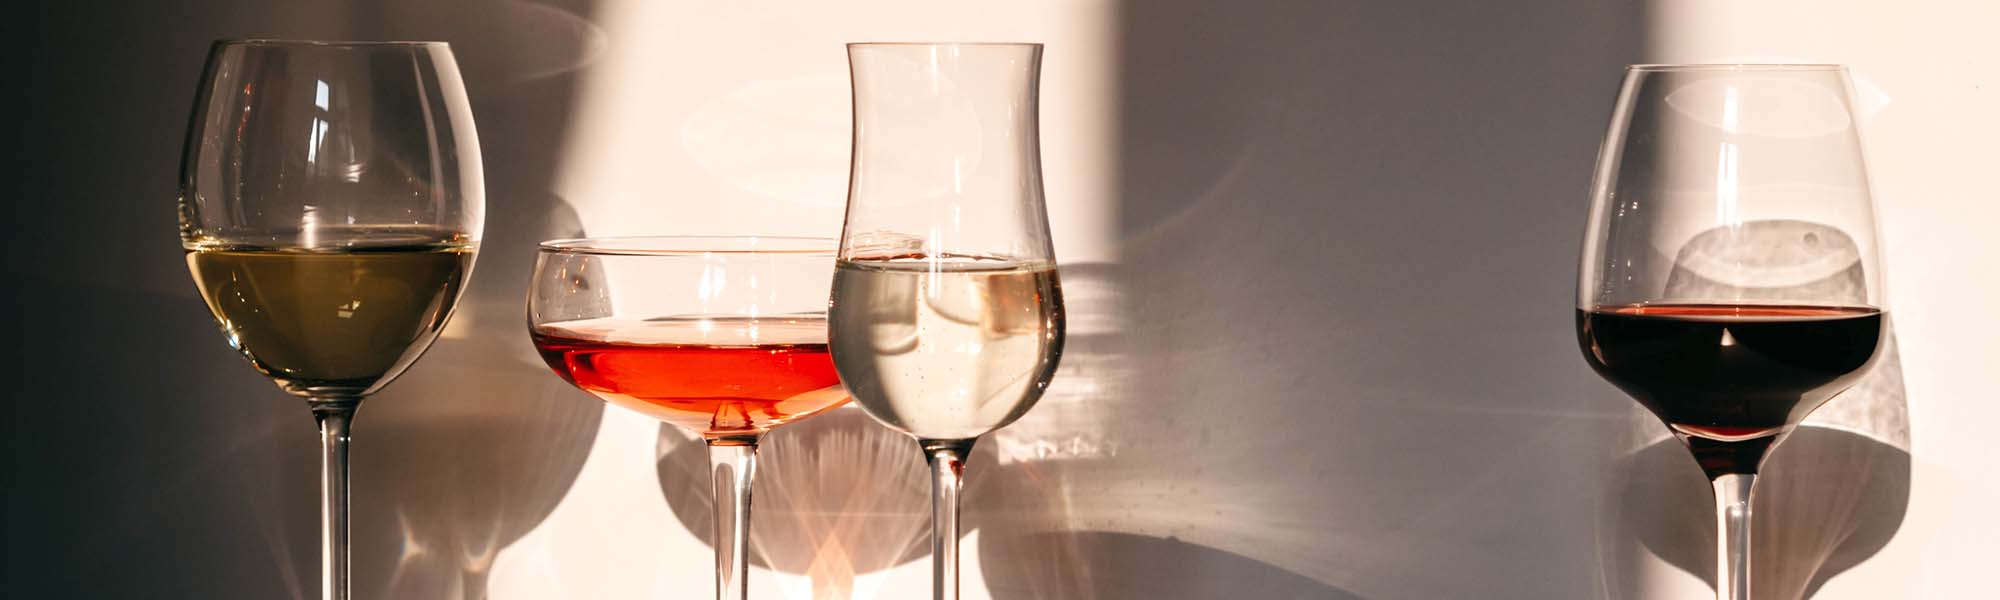 Different glasses with wine and other drinks